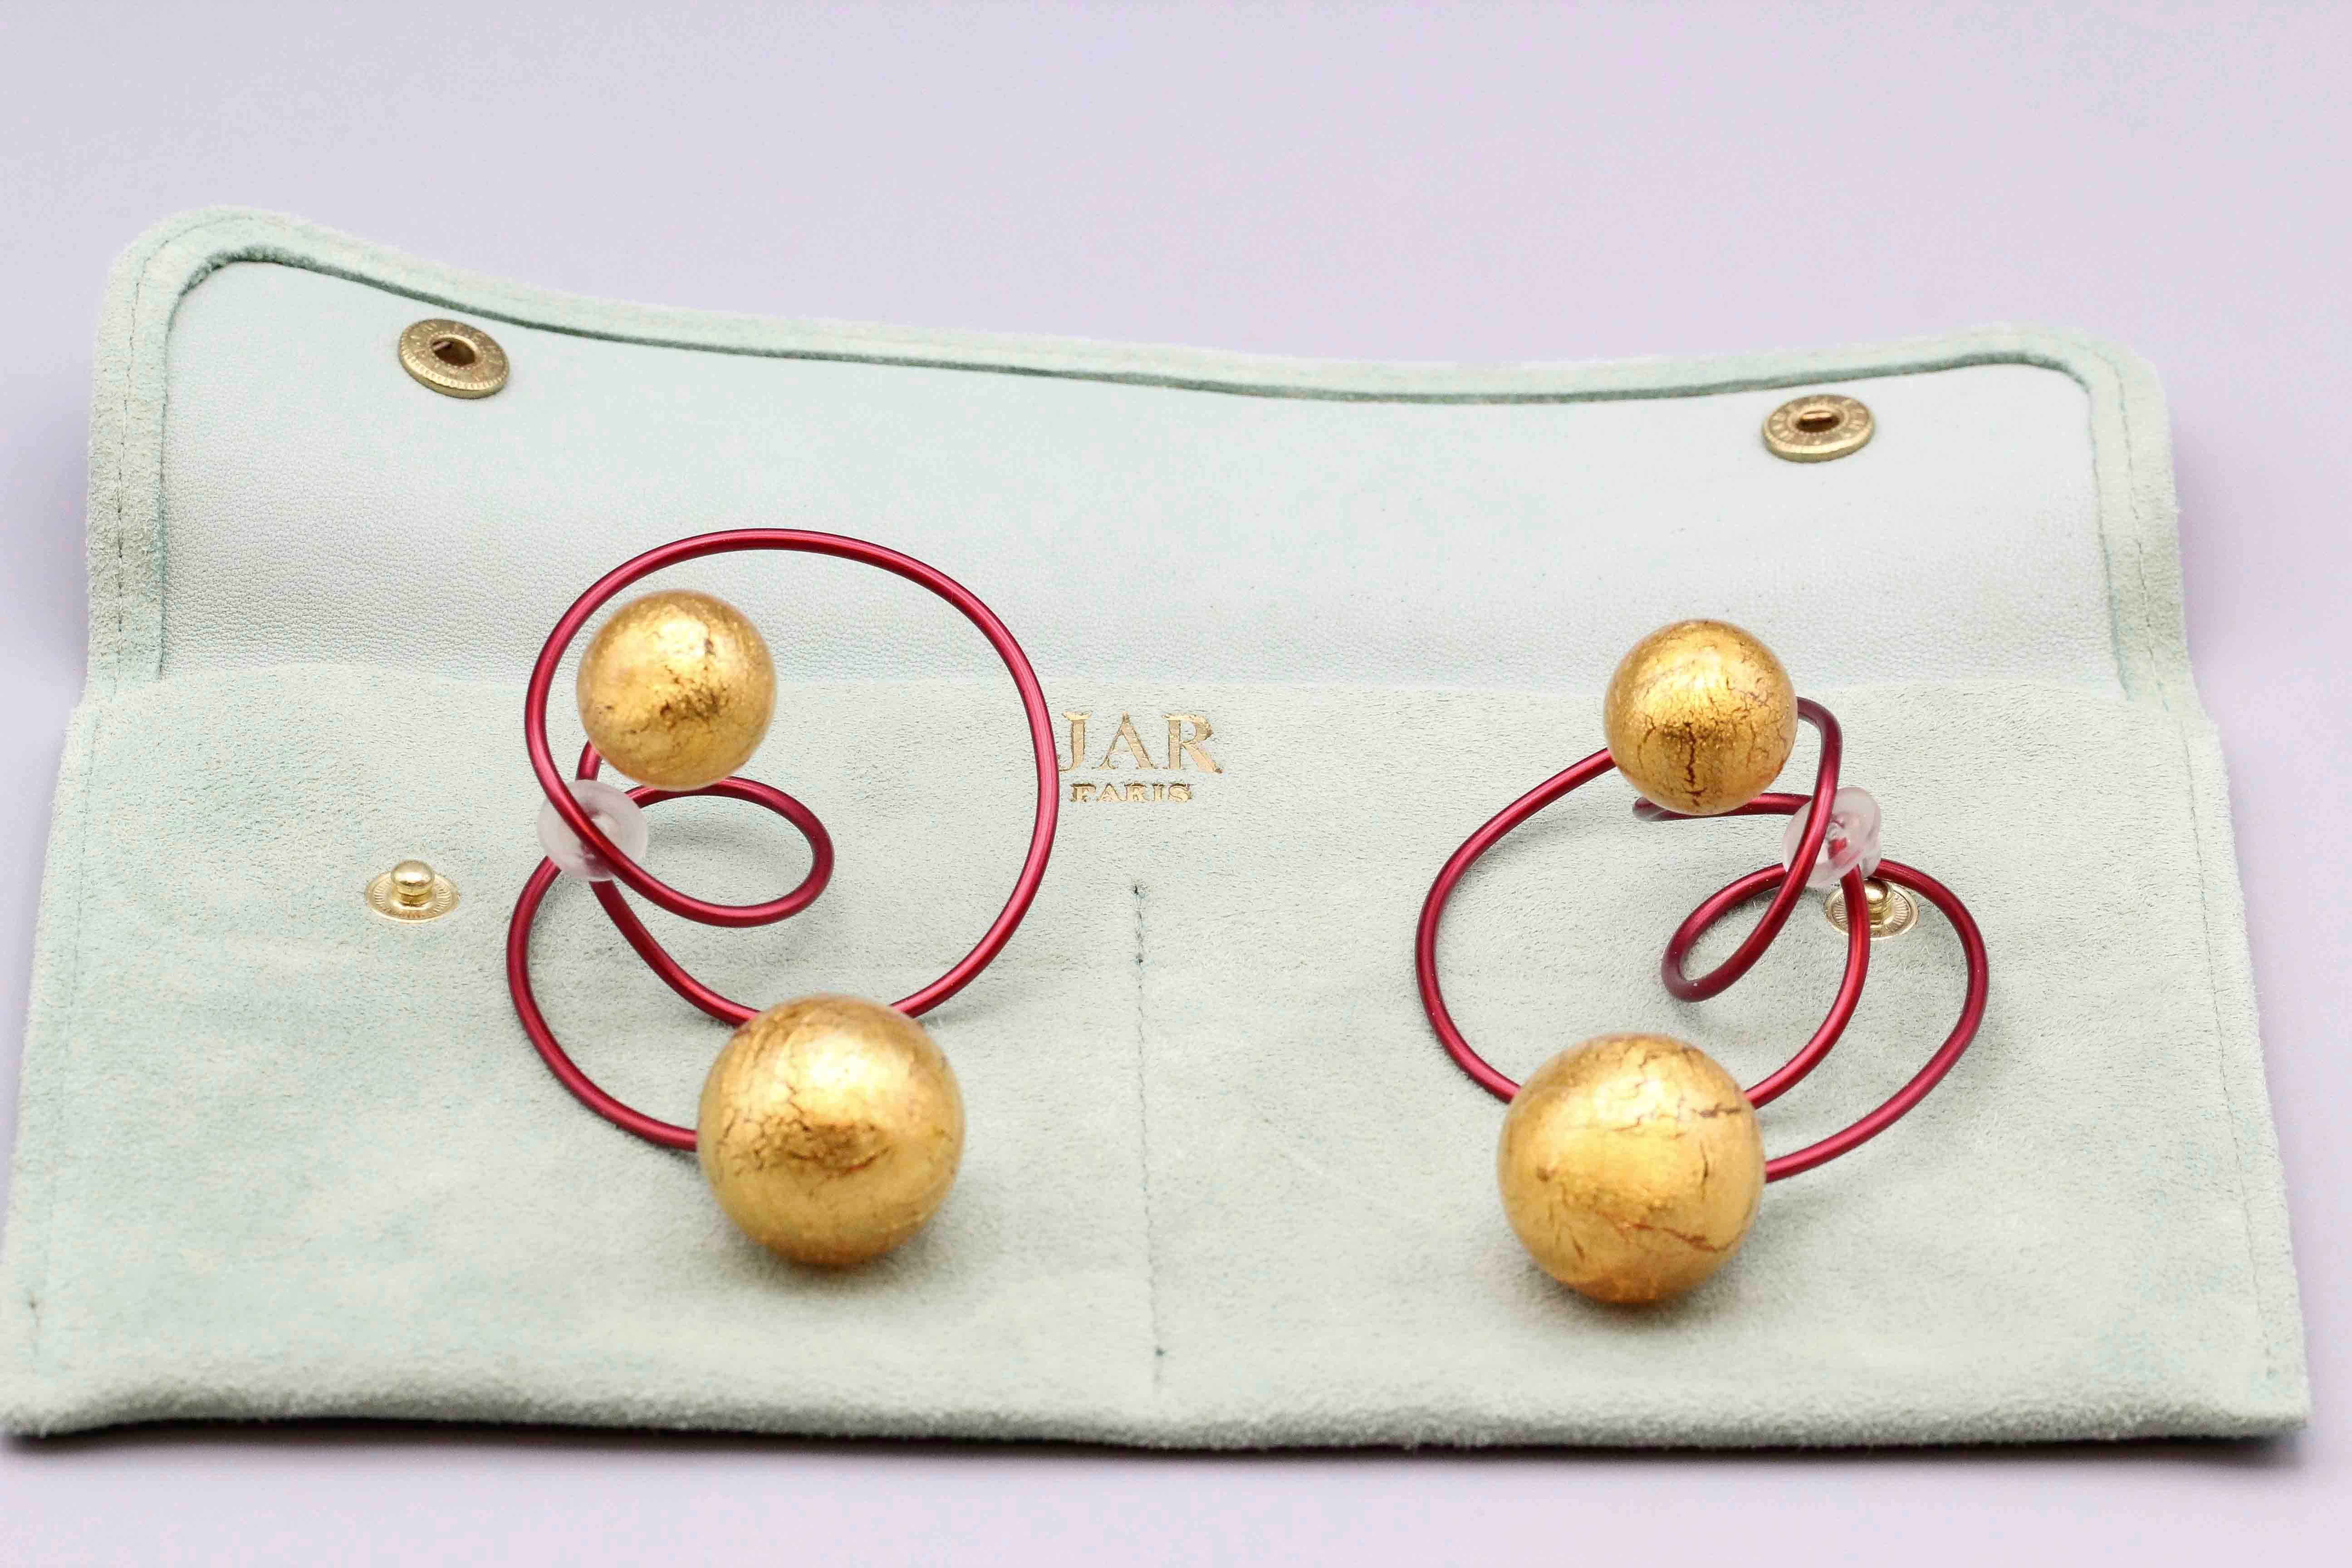 The Carnival a Venise earrings feature glass beads lined with gold leaf, enhanced by titanium wires, marked JAR Paris, reference number, and TITANE.  Rare red titanium wire on yellow gold leaf glass spheres. Weight approx. 36 grams. With original